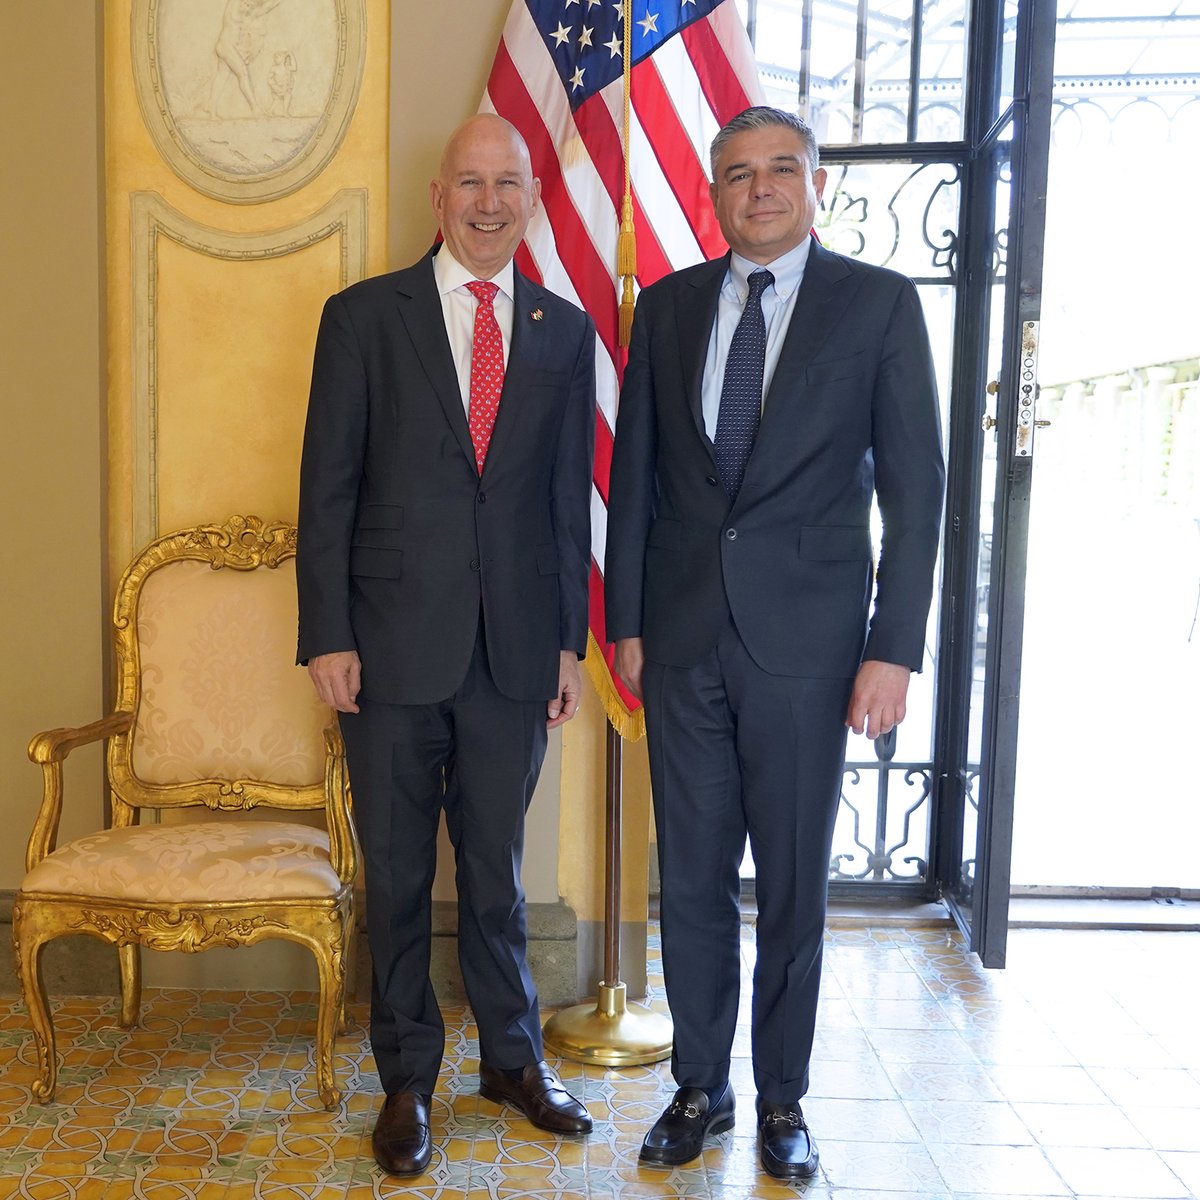 Great meeting with @bakerhughesco CEO Lorenzo Simonelli to discuss investment opportunities in Italy that benefit both countries.  With three manufacturing sites in Tuscany, Baker Hughes is the largest American-owned employer in the region and a leader in US-Italy commercial